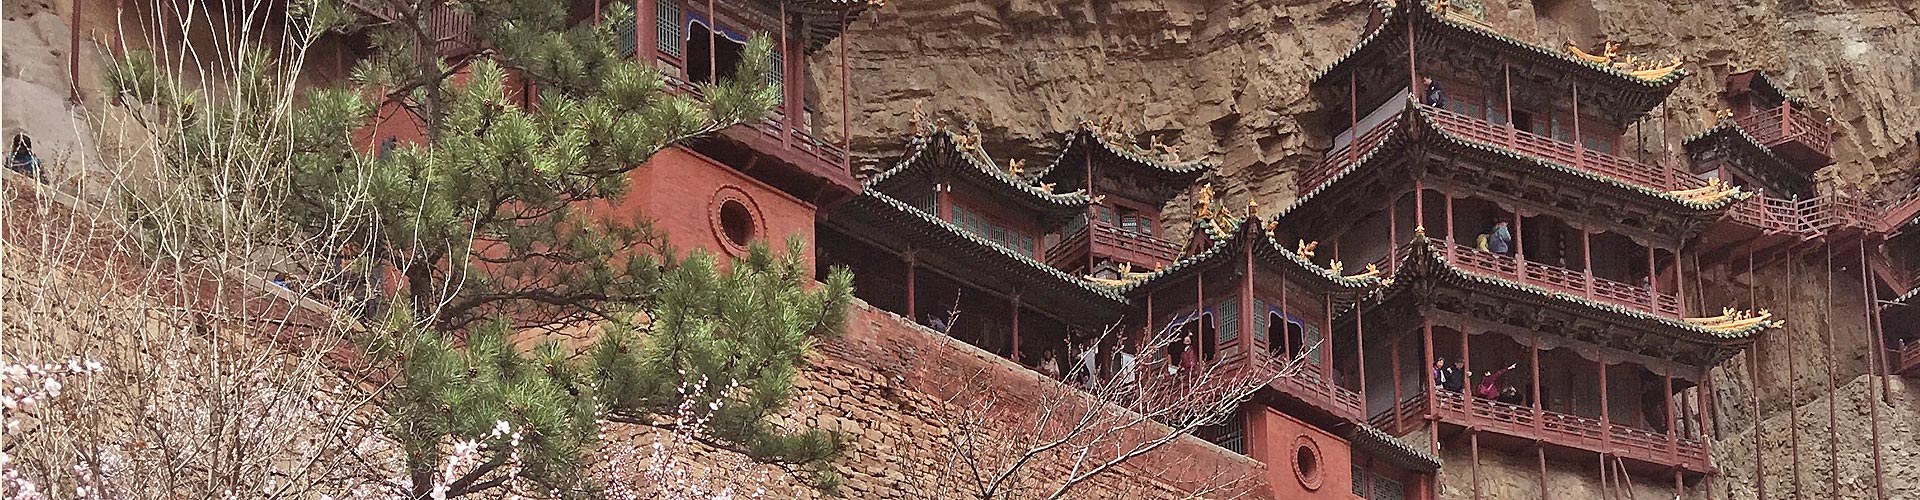 Trip to Hangying Monastery in Datong